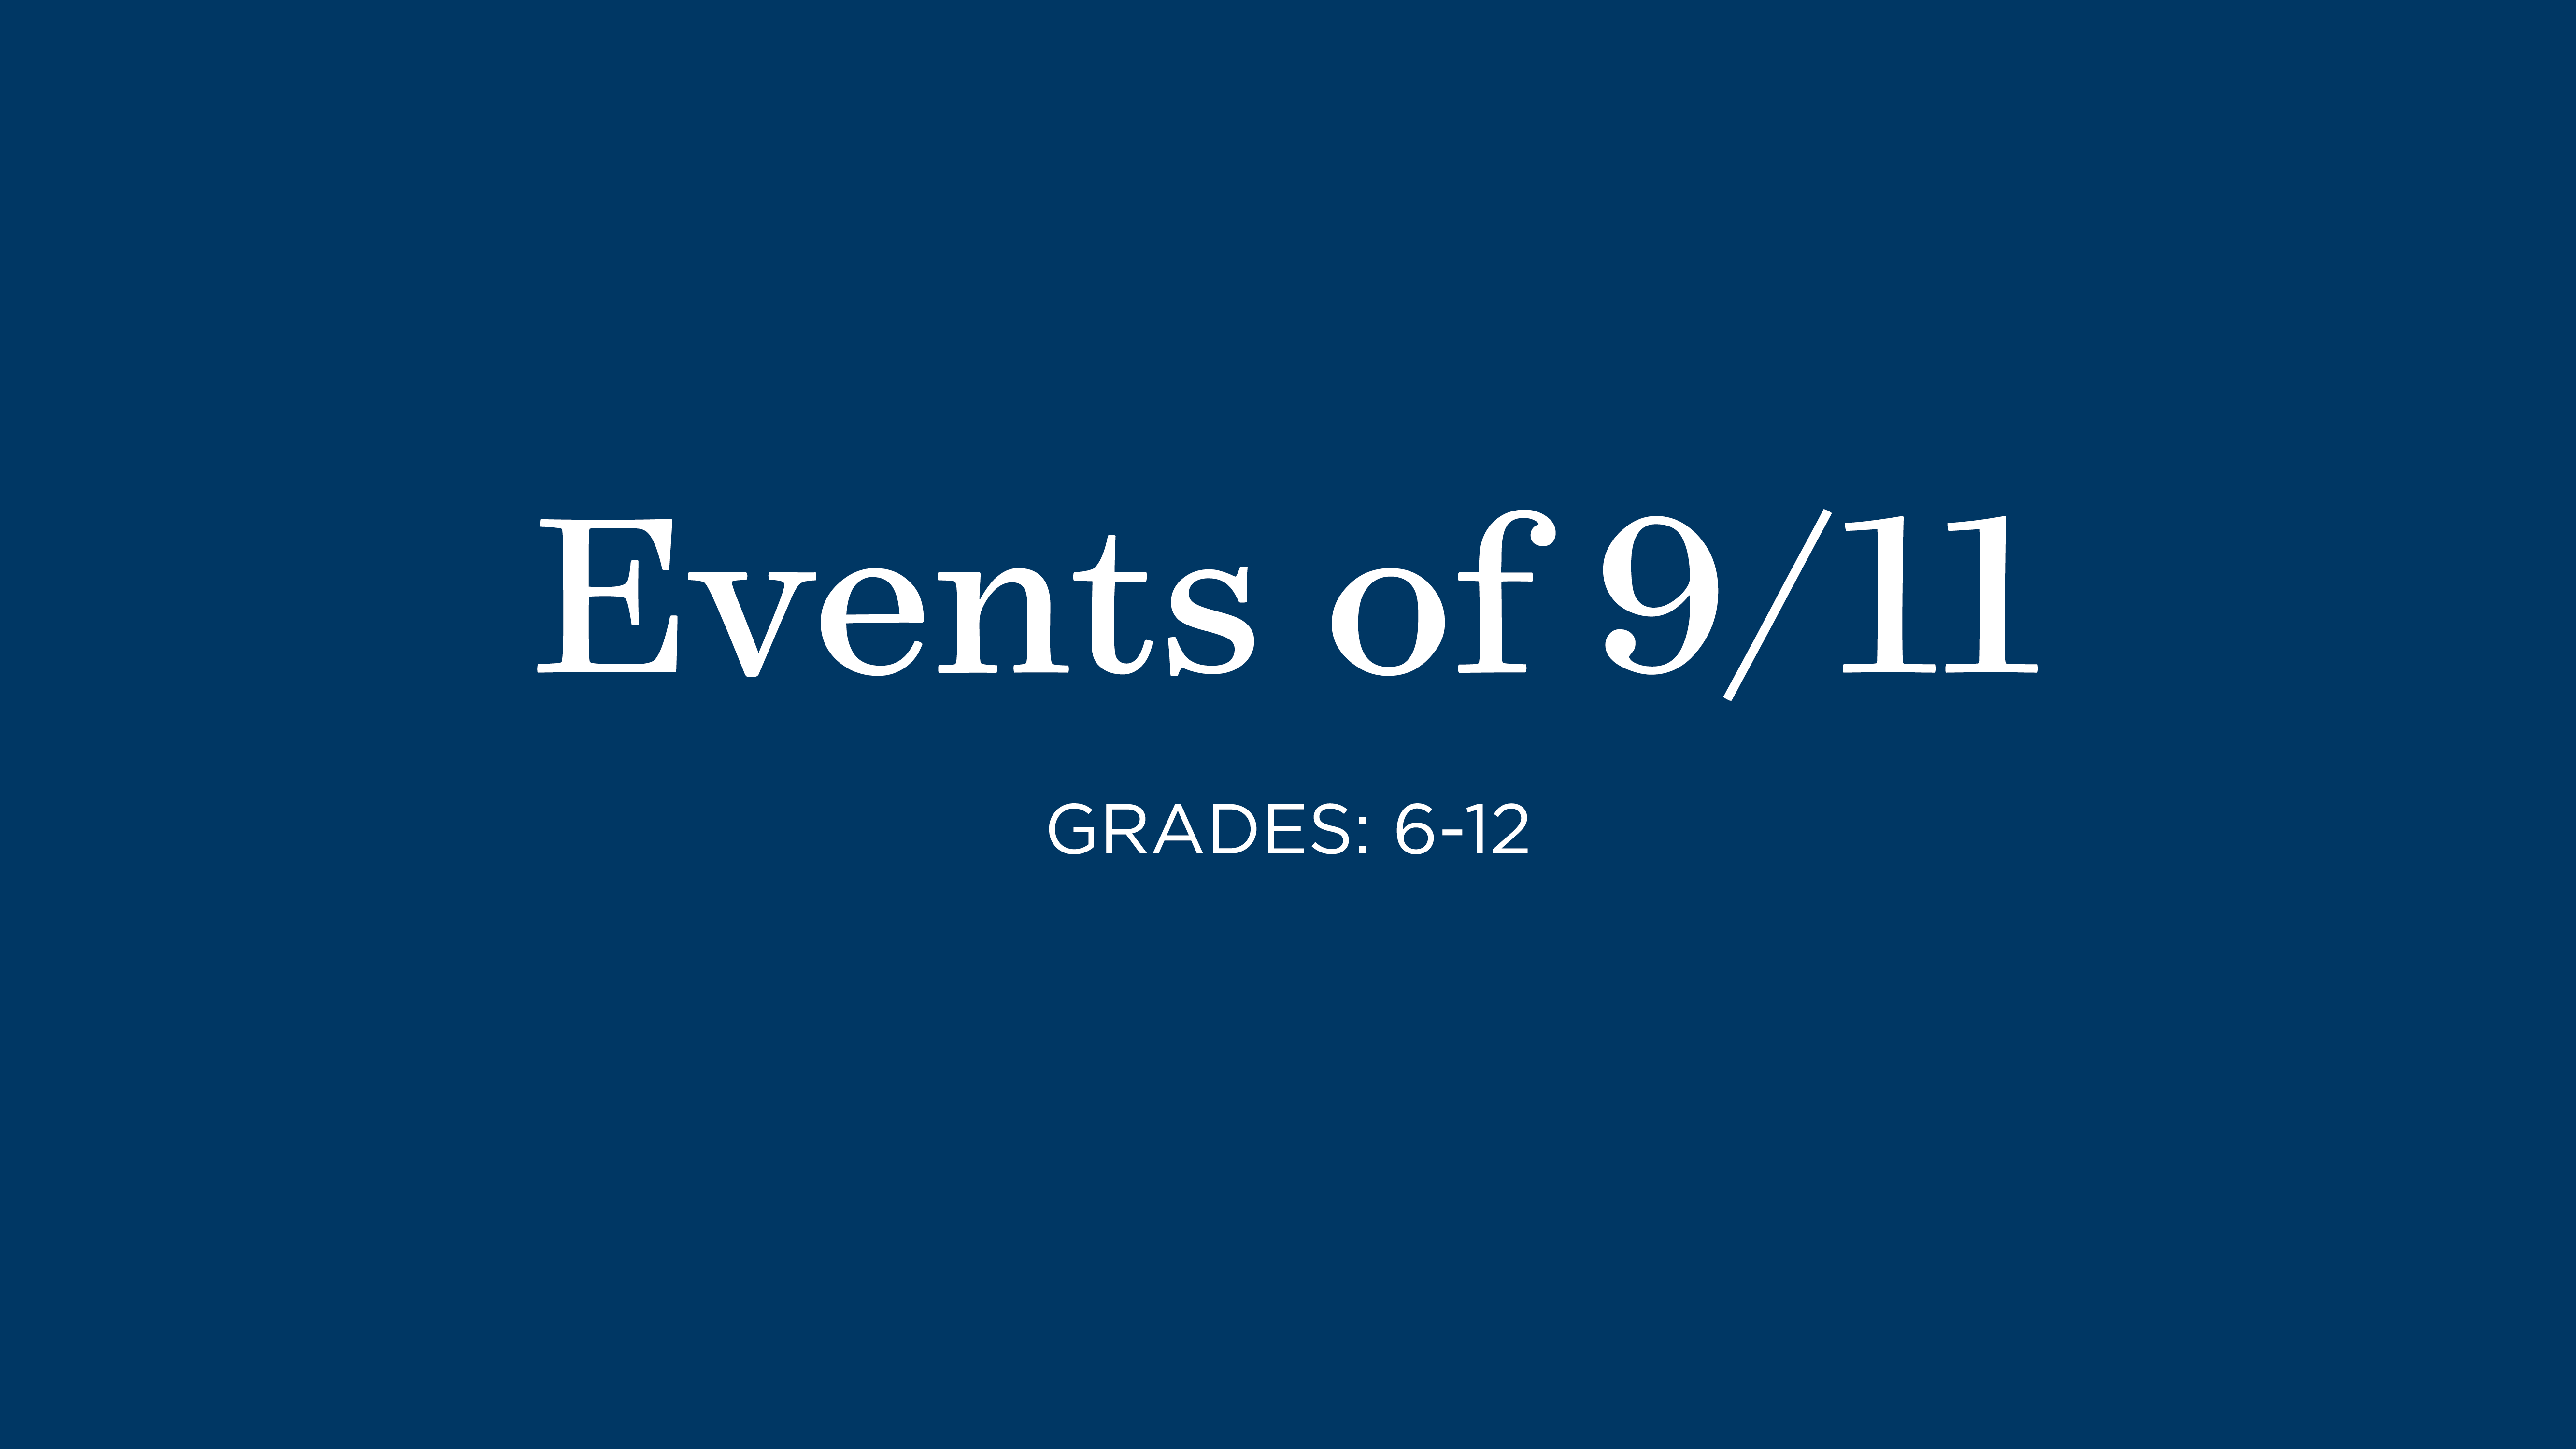 Image text: Events of 9/11 - Grades 6-12